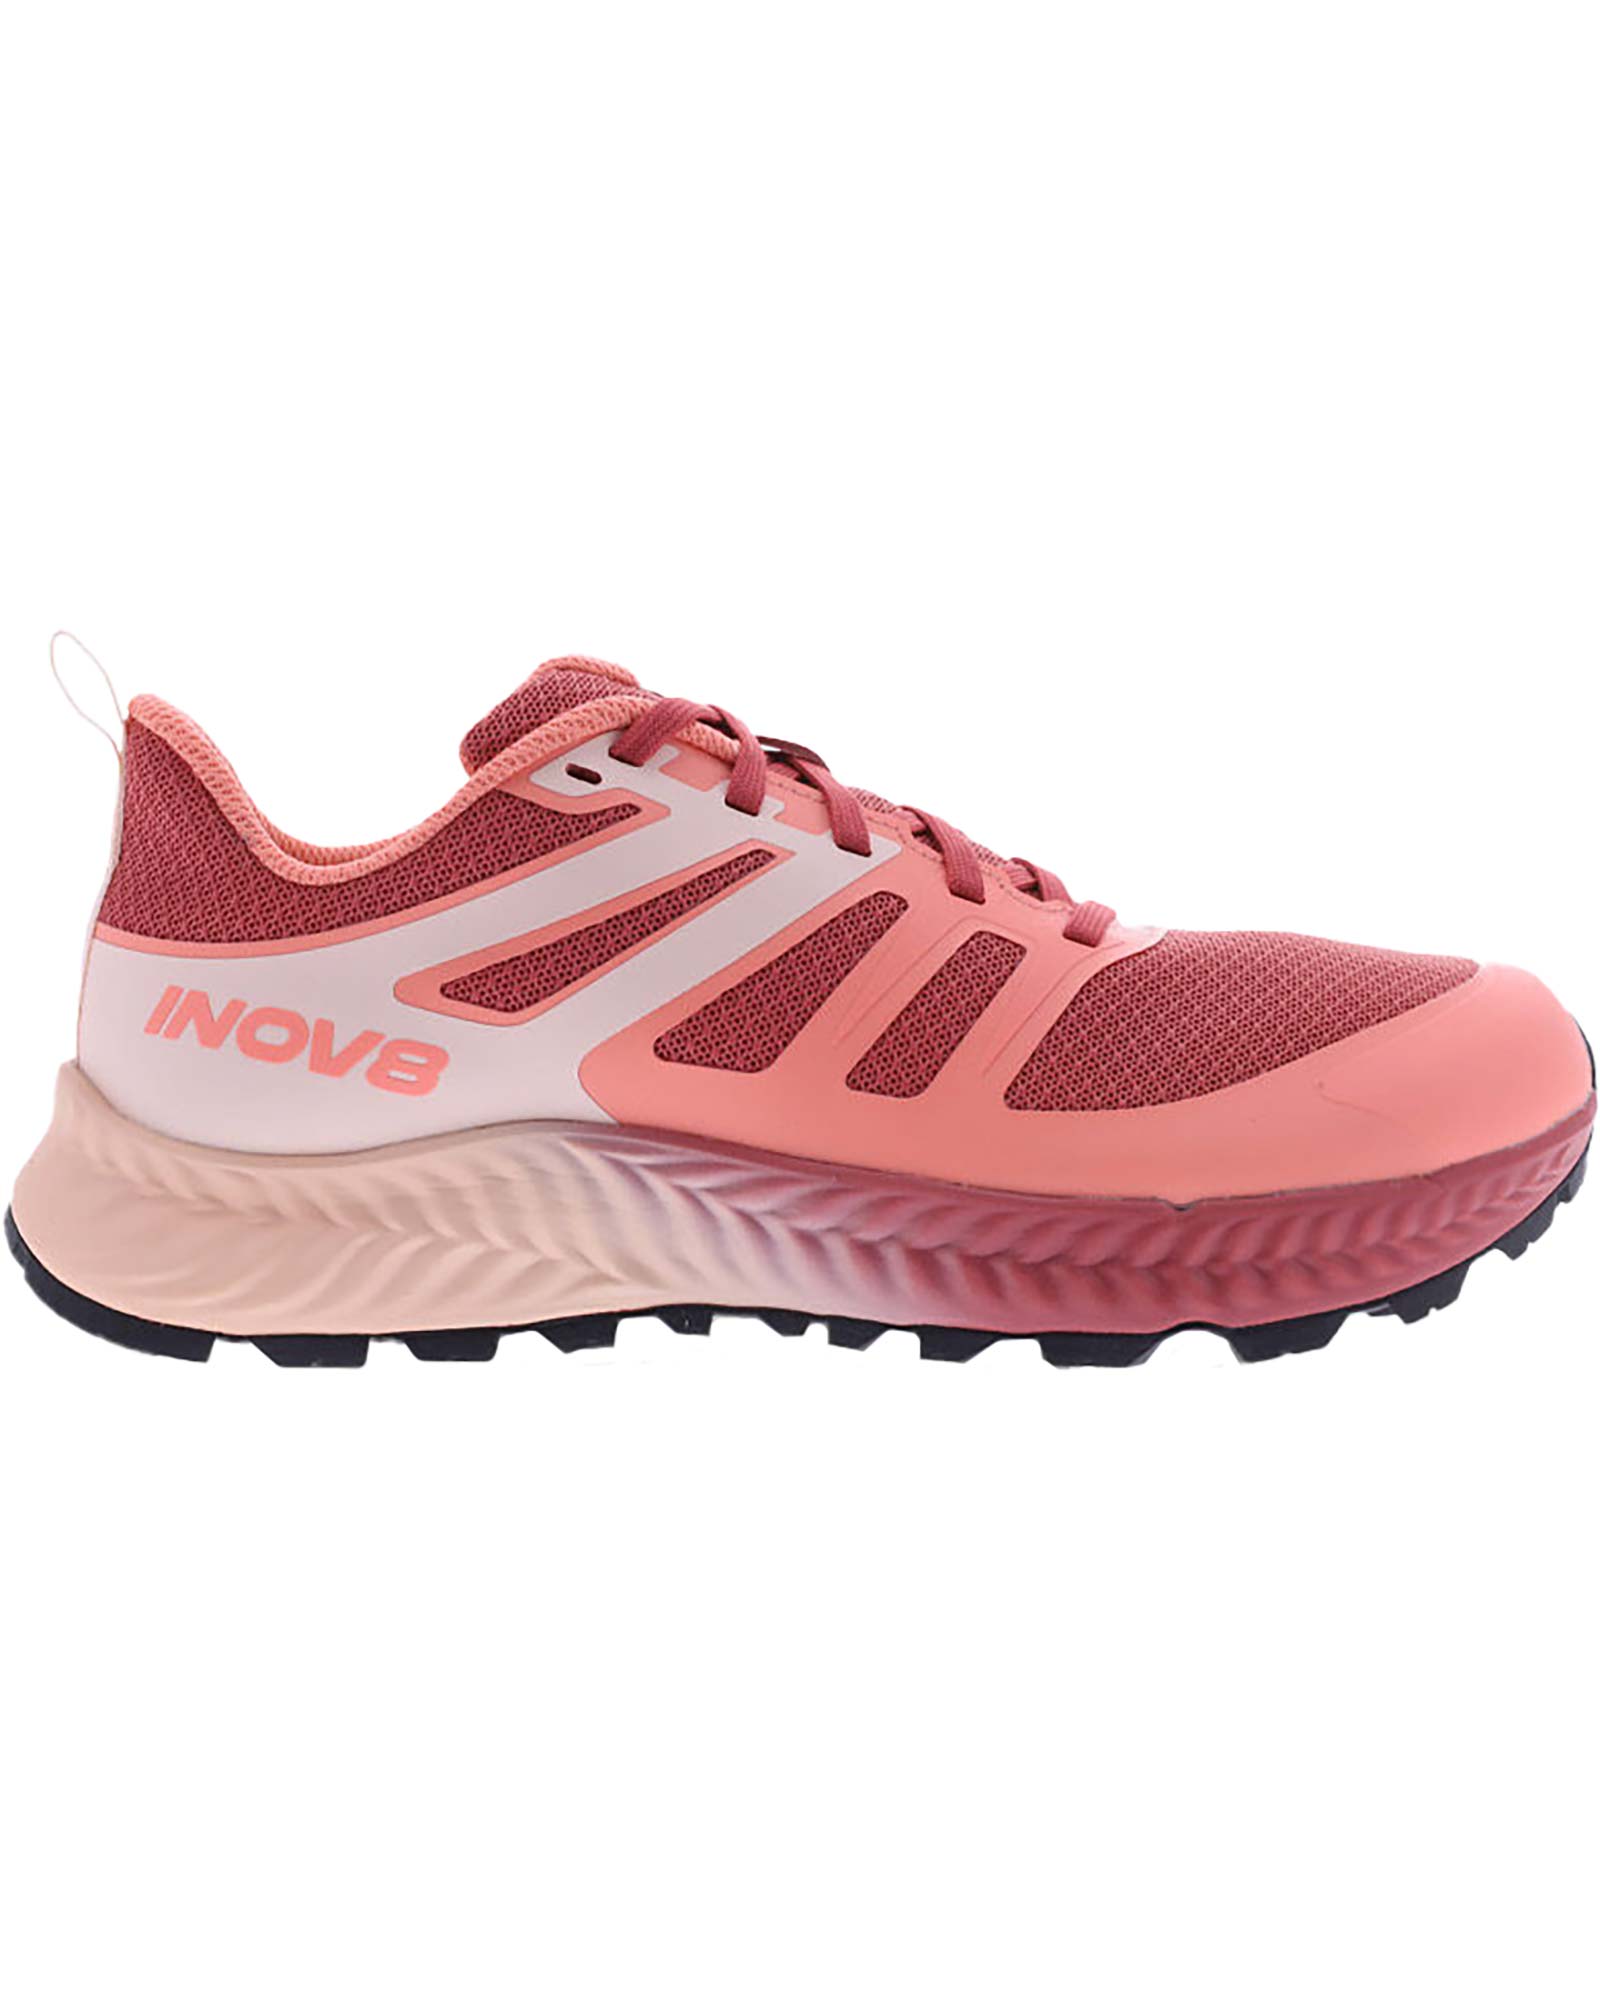 INOV8 Women's TrailFly Wide Fit Trail Running Shoes